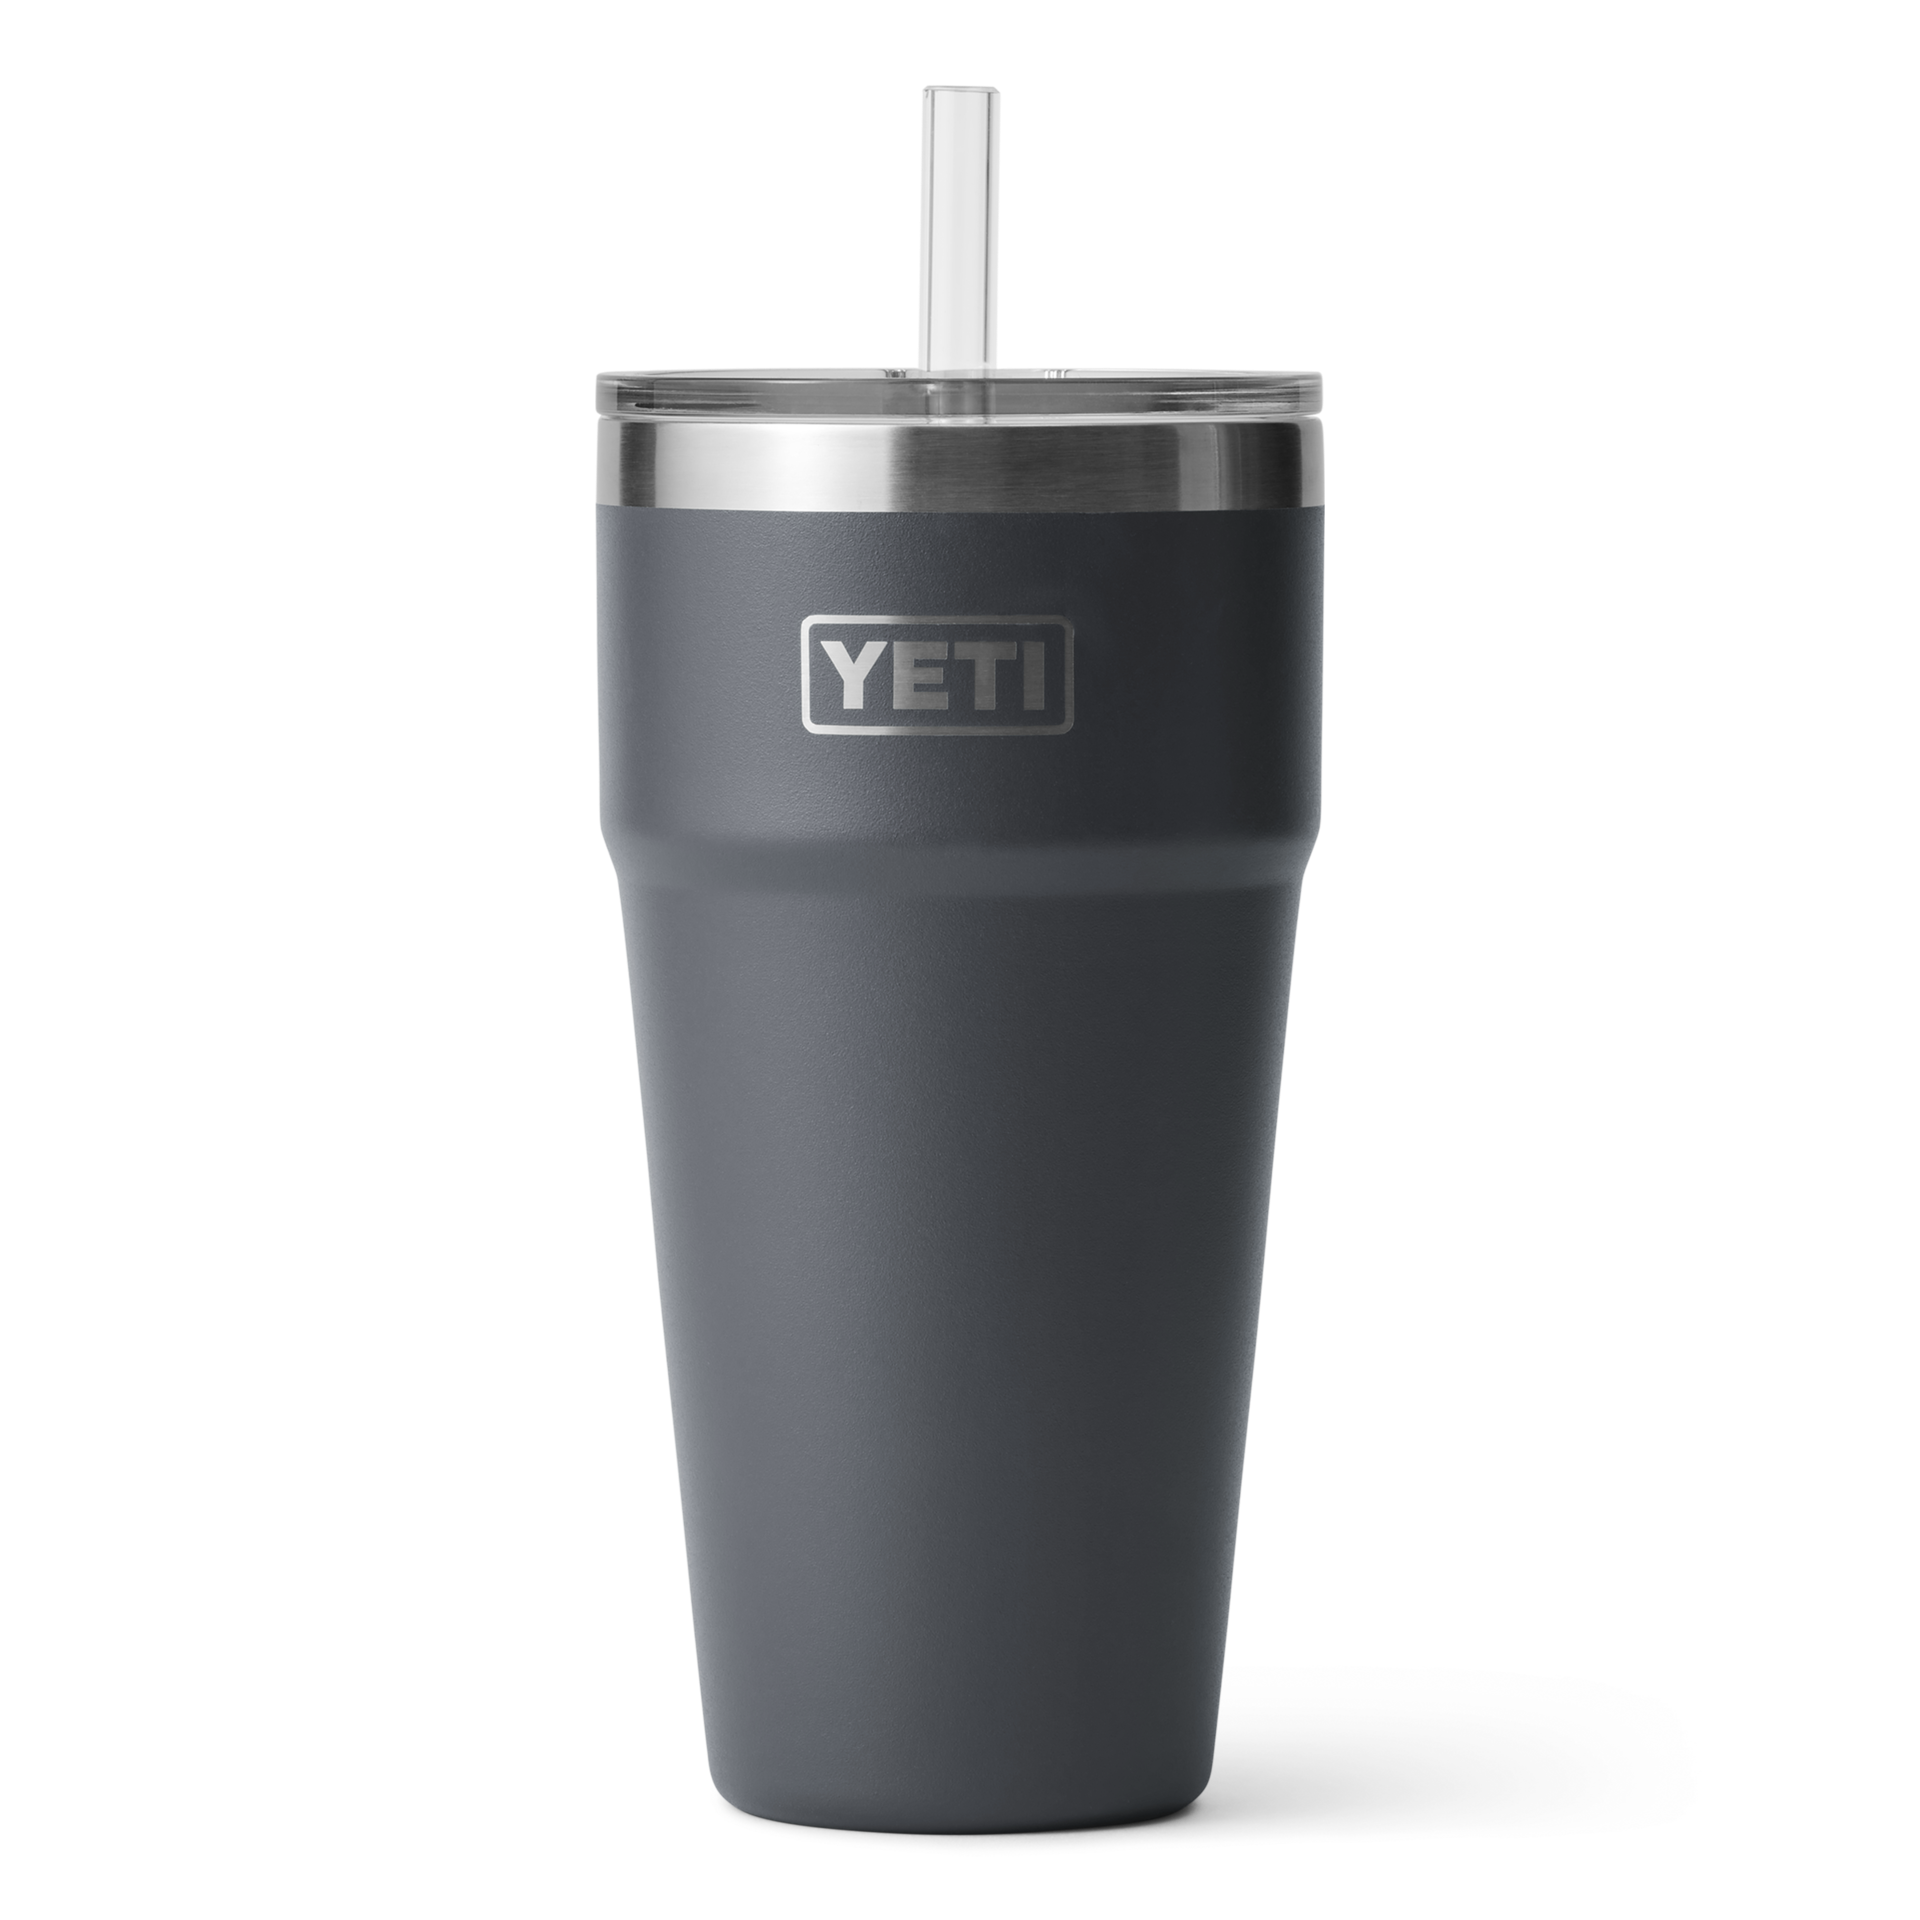 Yeti coolers now come in two new summer colors: Cosmic Lilac and